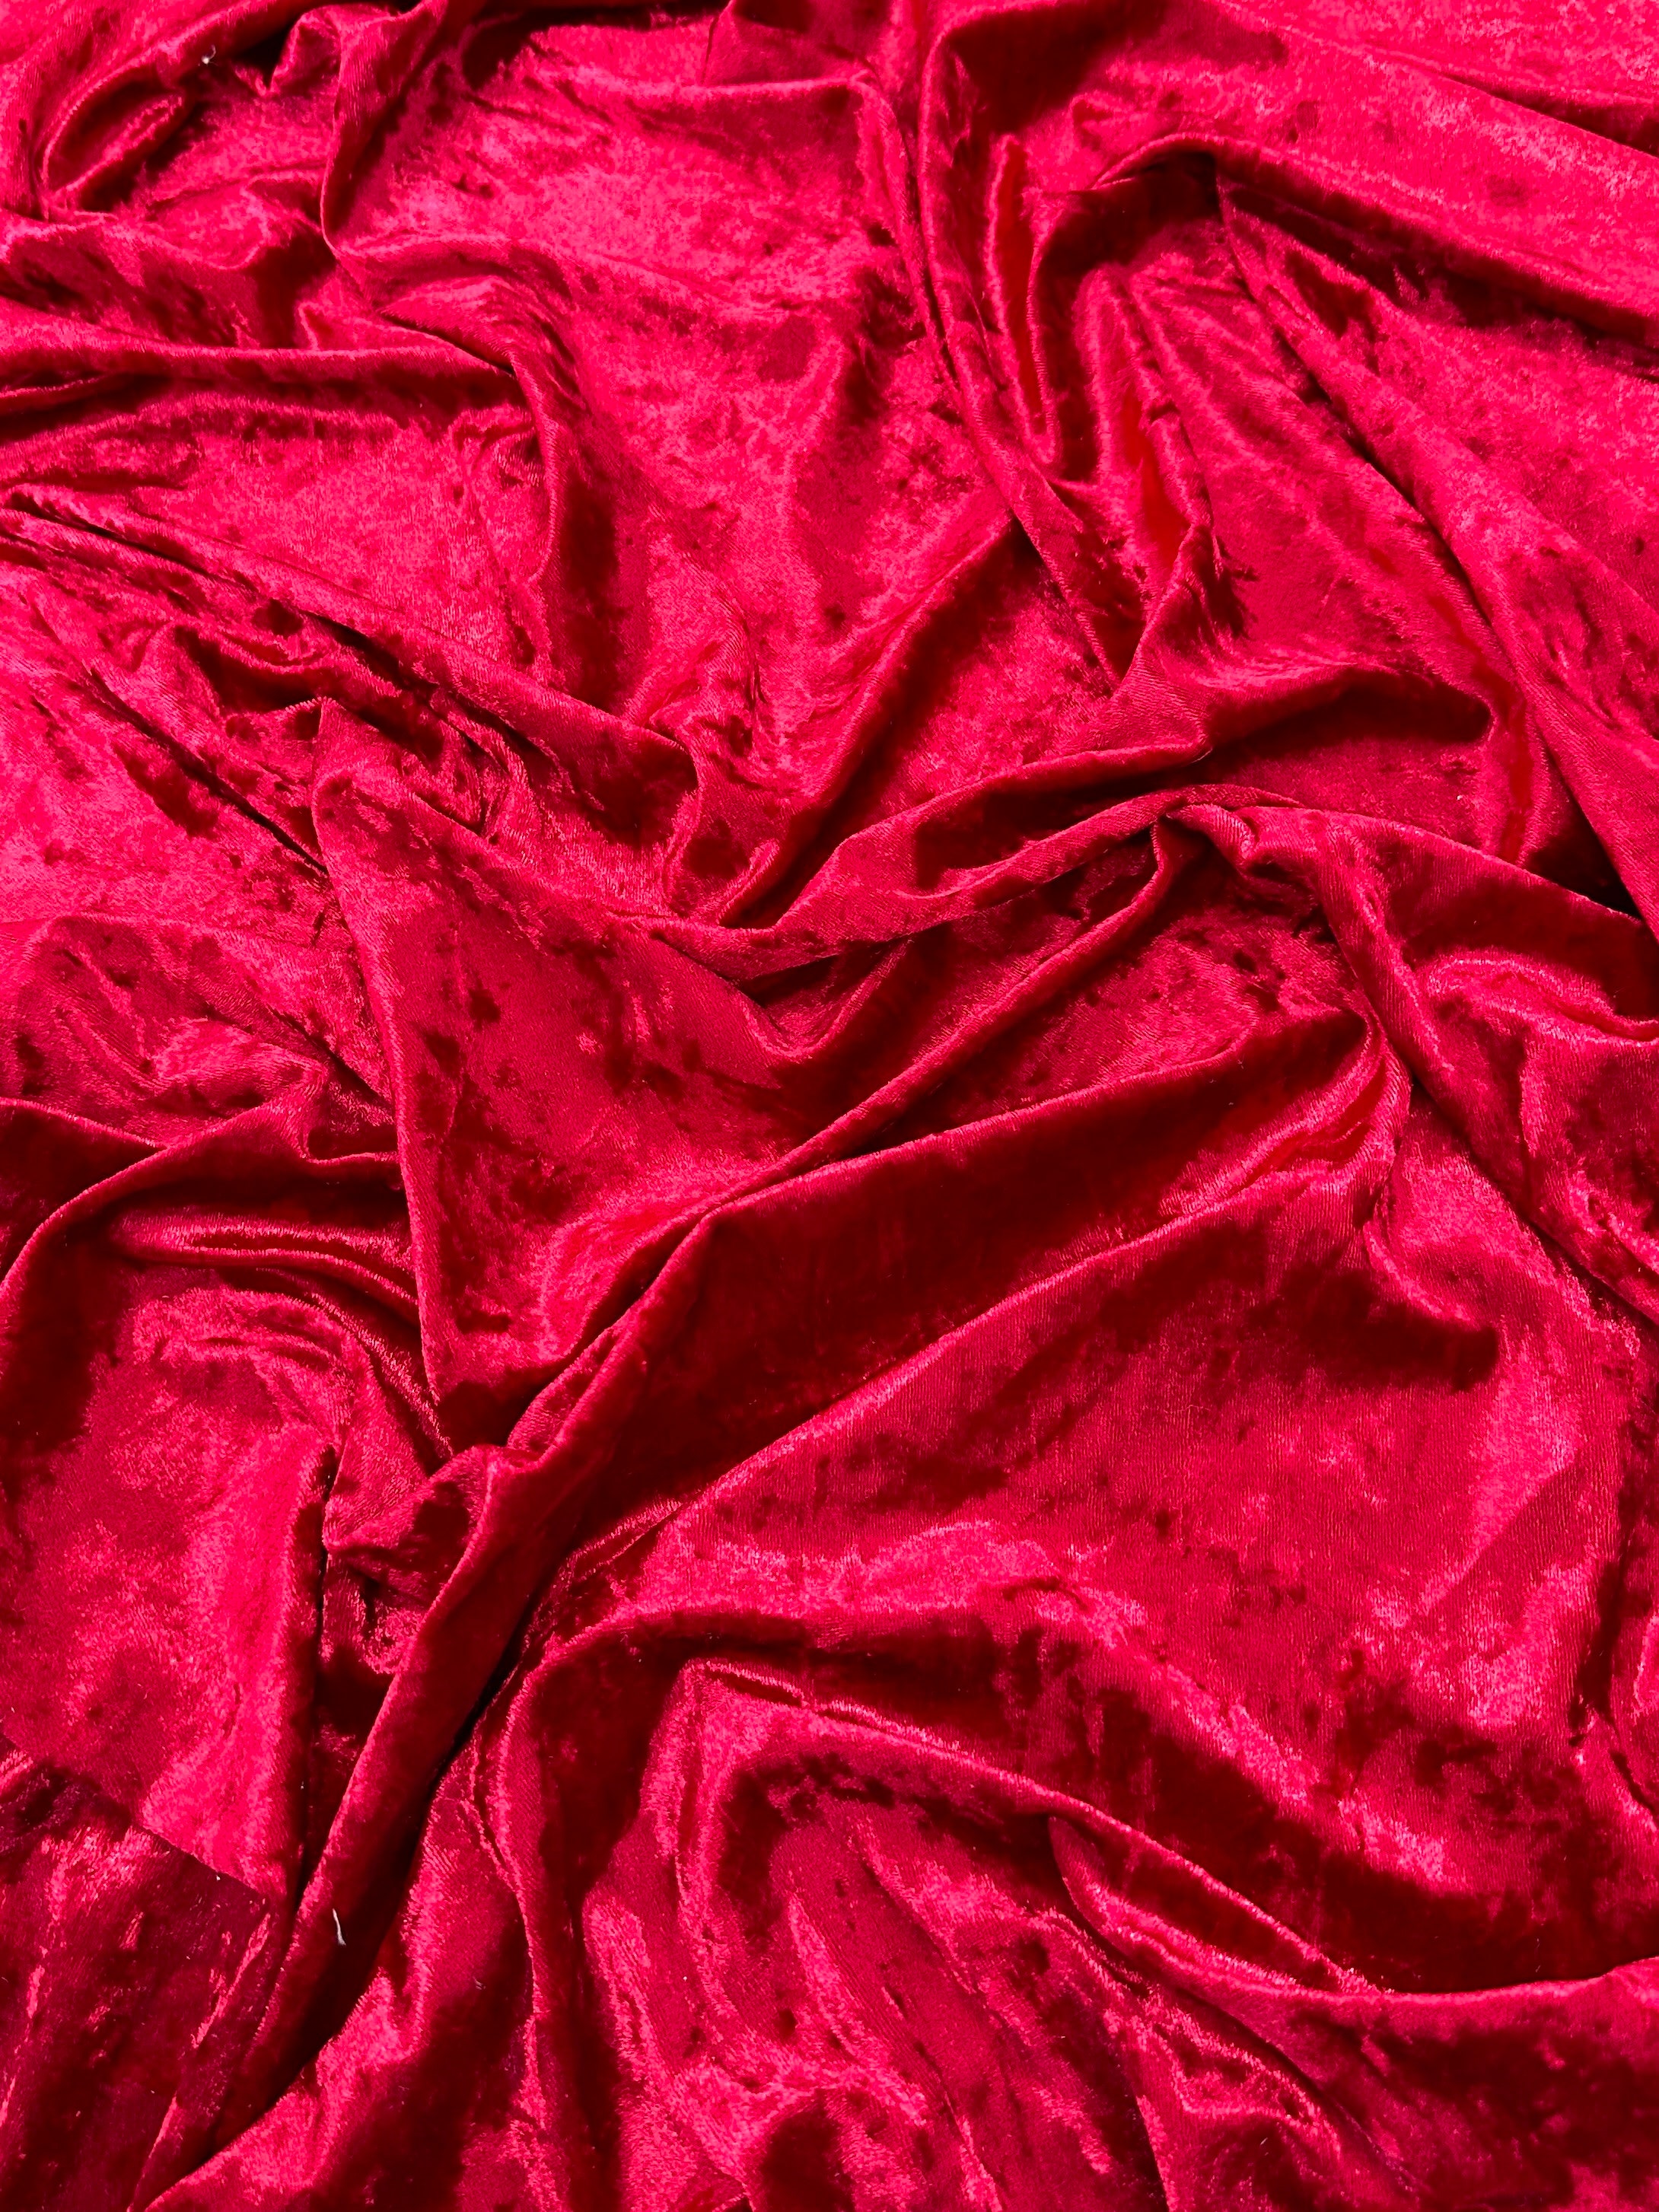 PREMIUM QUALITY Red Crushed Velvet Fabric by the Yard, Red Stretch